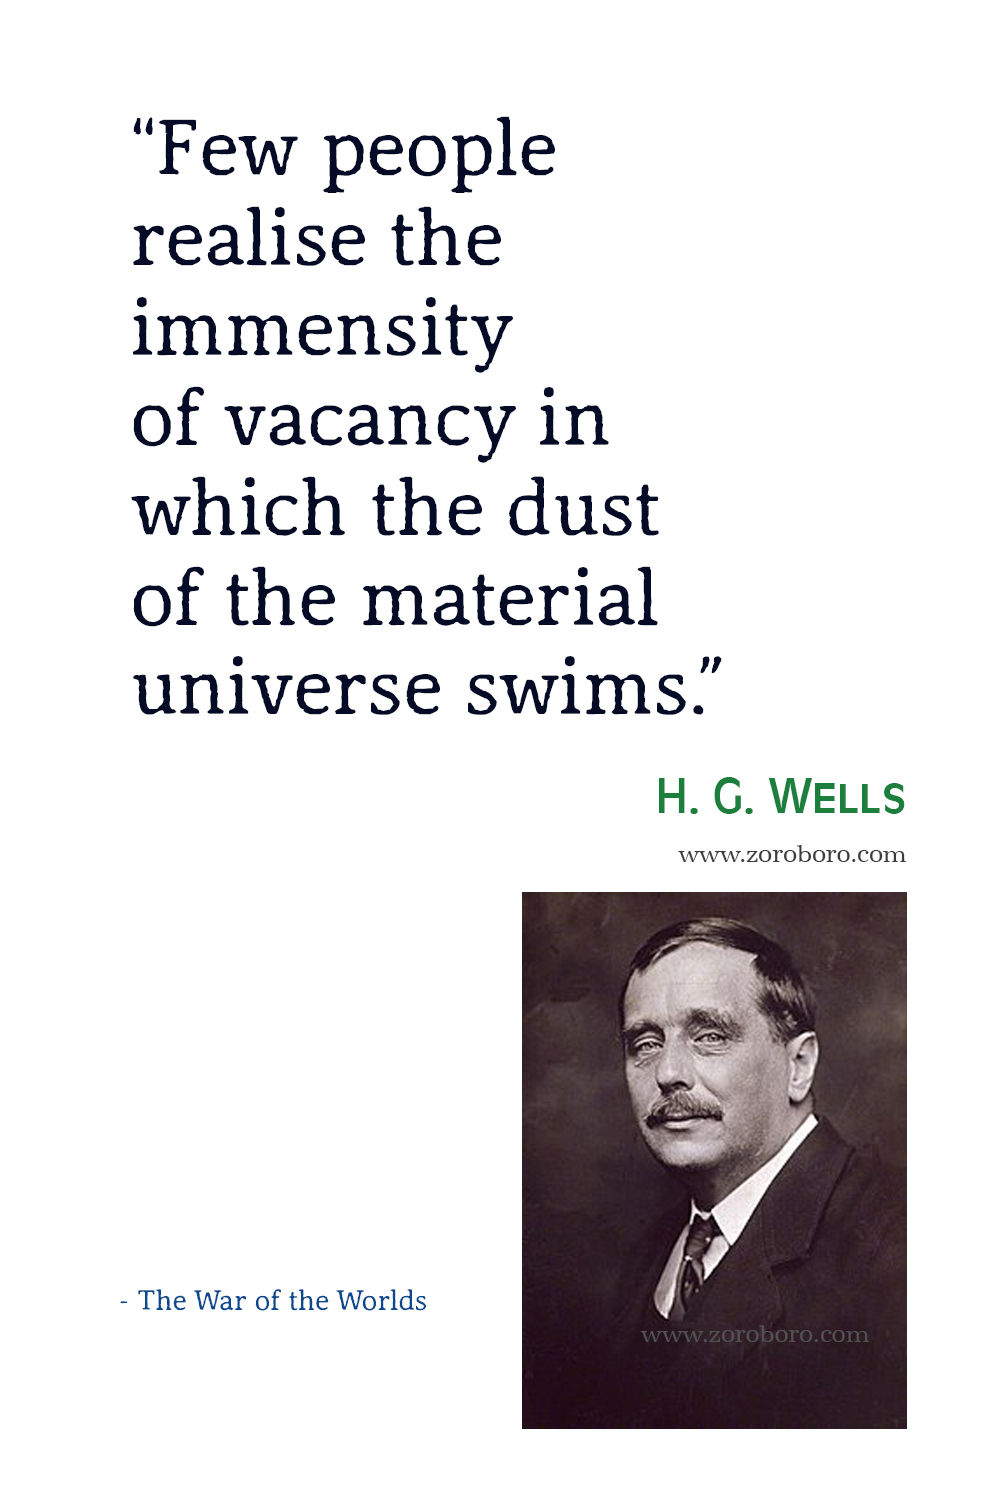 H. G. Wells Quotes, H. G. Wells The Time Machine, The Invisible Man, The Island of Dr. Moreau Quotes, H. G. Wells Books, Short Stories Quotes,H. G. Wells The Time Machine